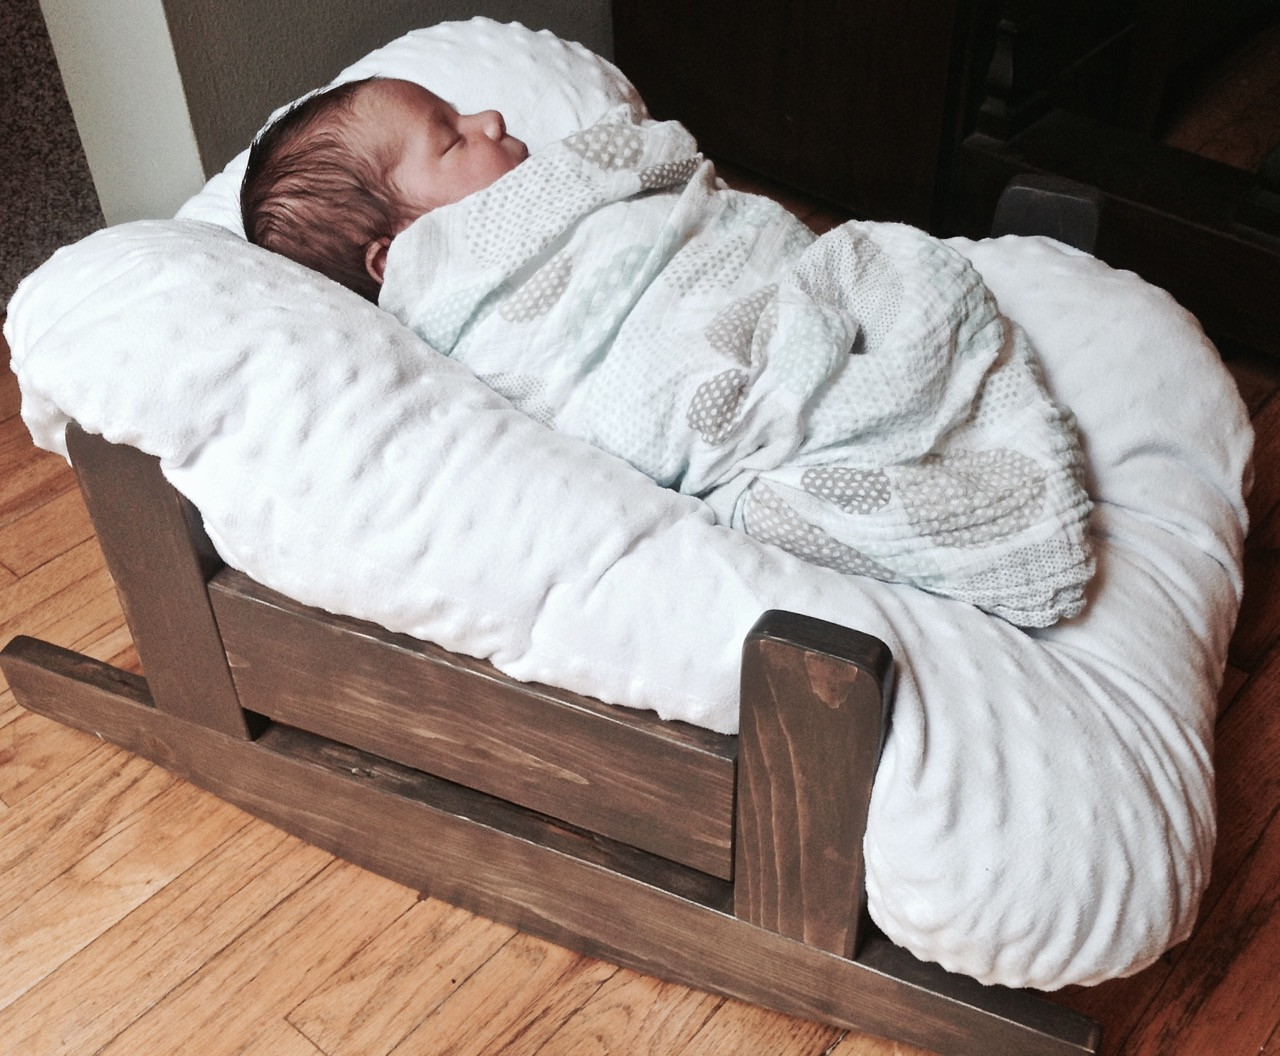 DIY Baby Pillows
 The Project Lady DIY Wooden Baby Pillow Rocker Bassinet